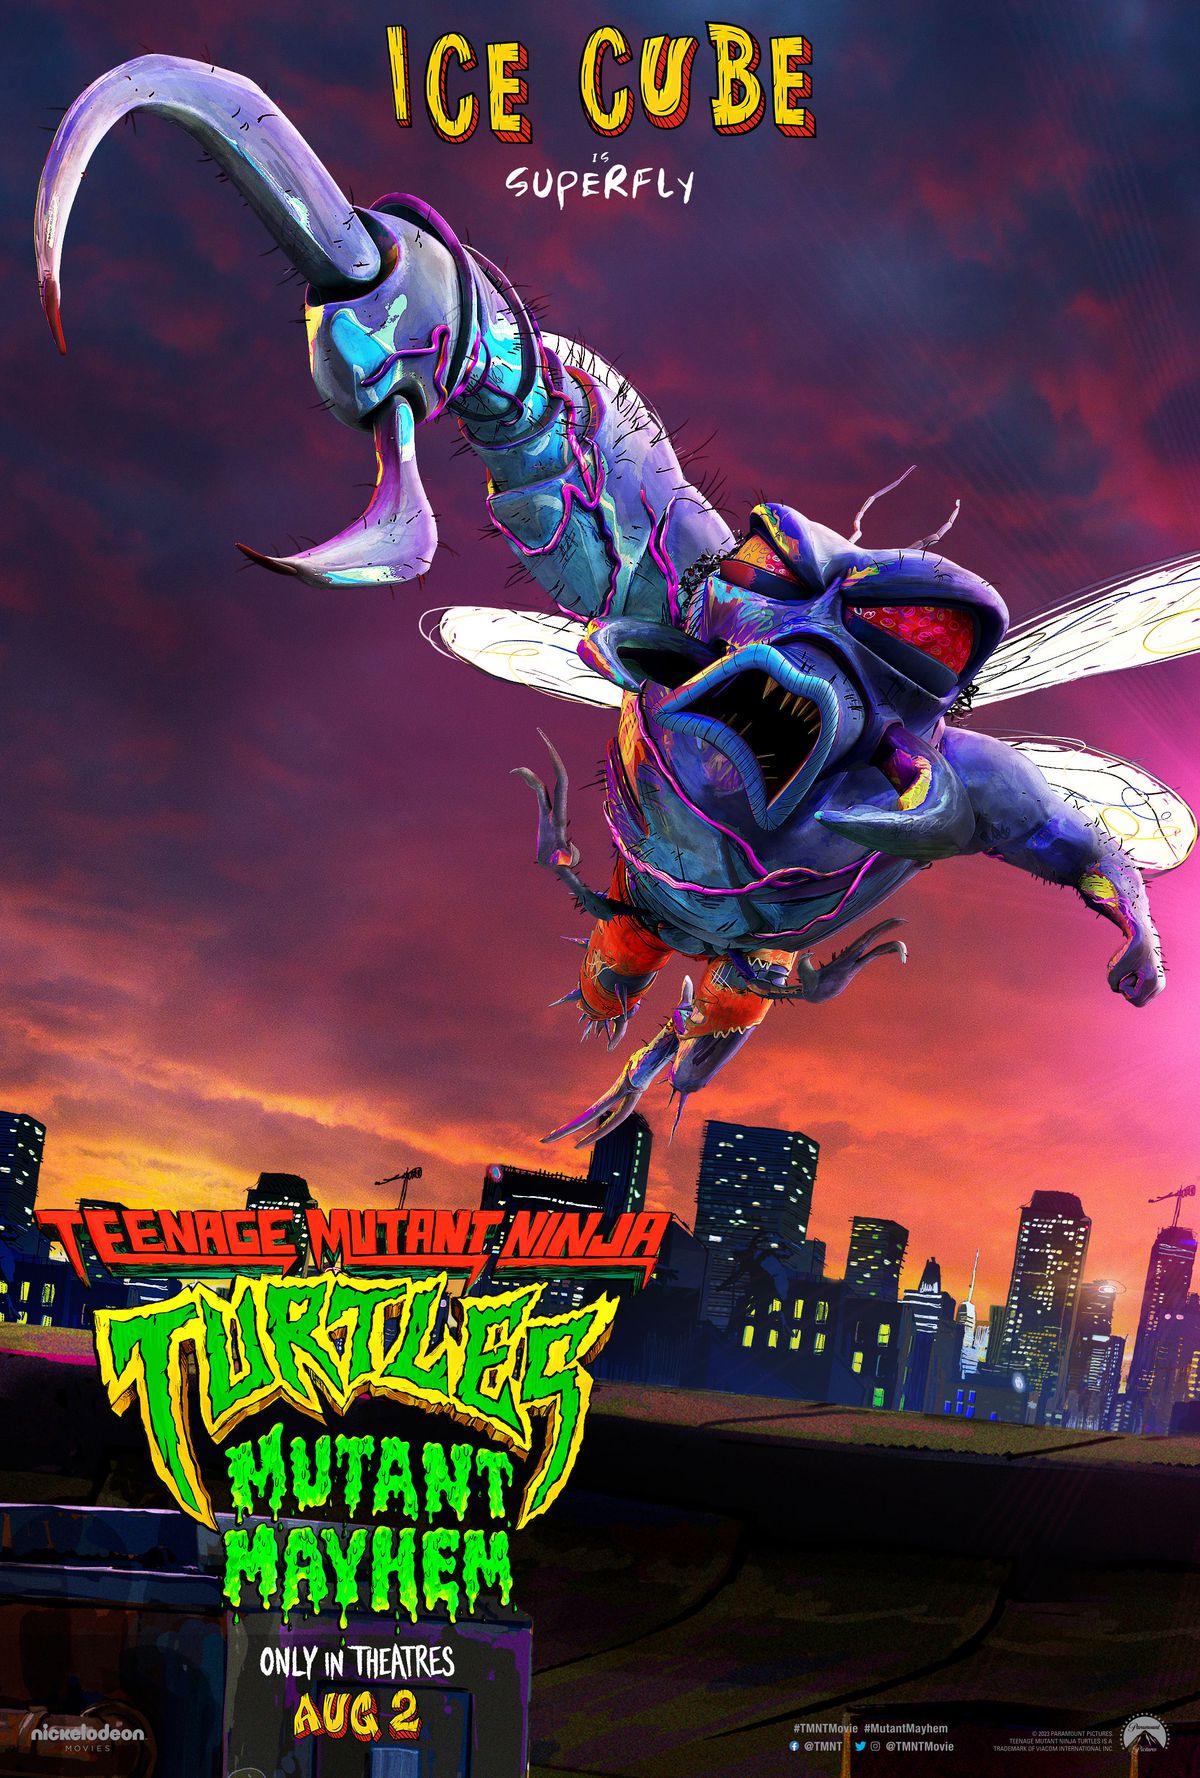 A character poster for Superfly, a gross anthropomorphic fly man, voiced by Ice Cube, in Teenage Mutant Ninja Turtles: Mutant Mayhem. 